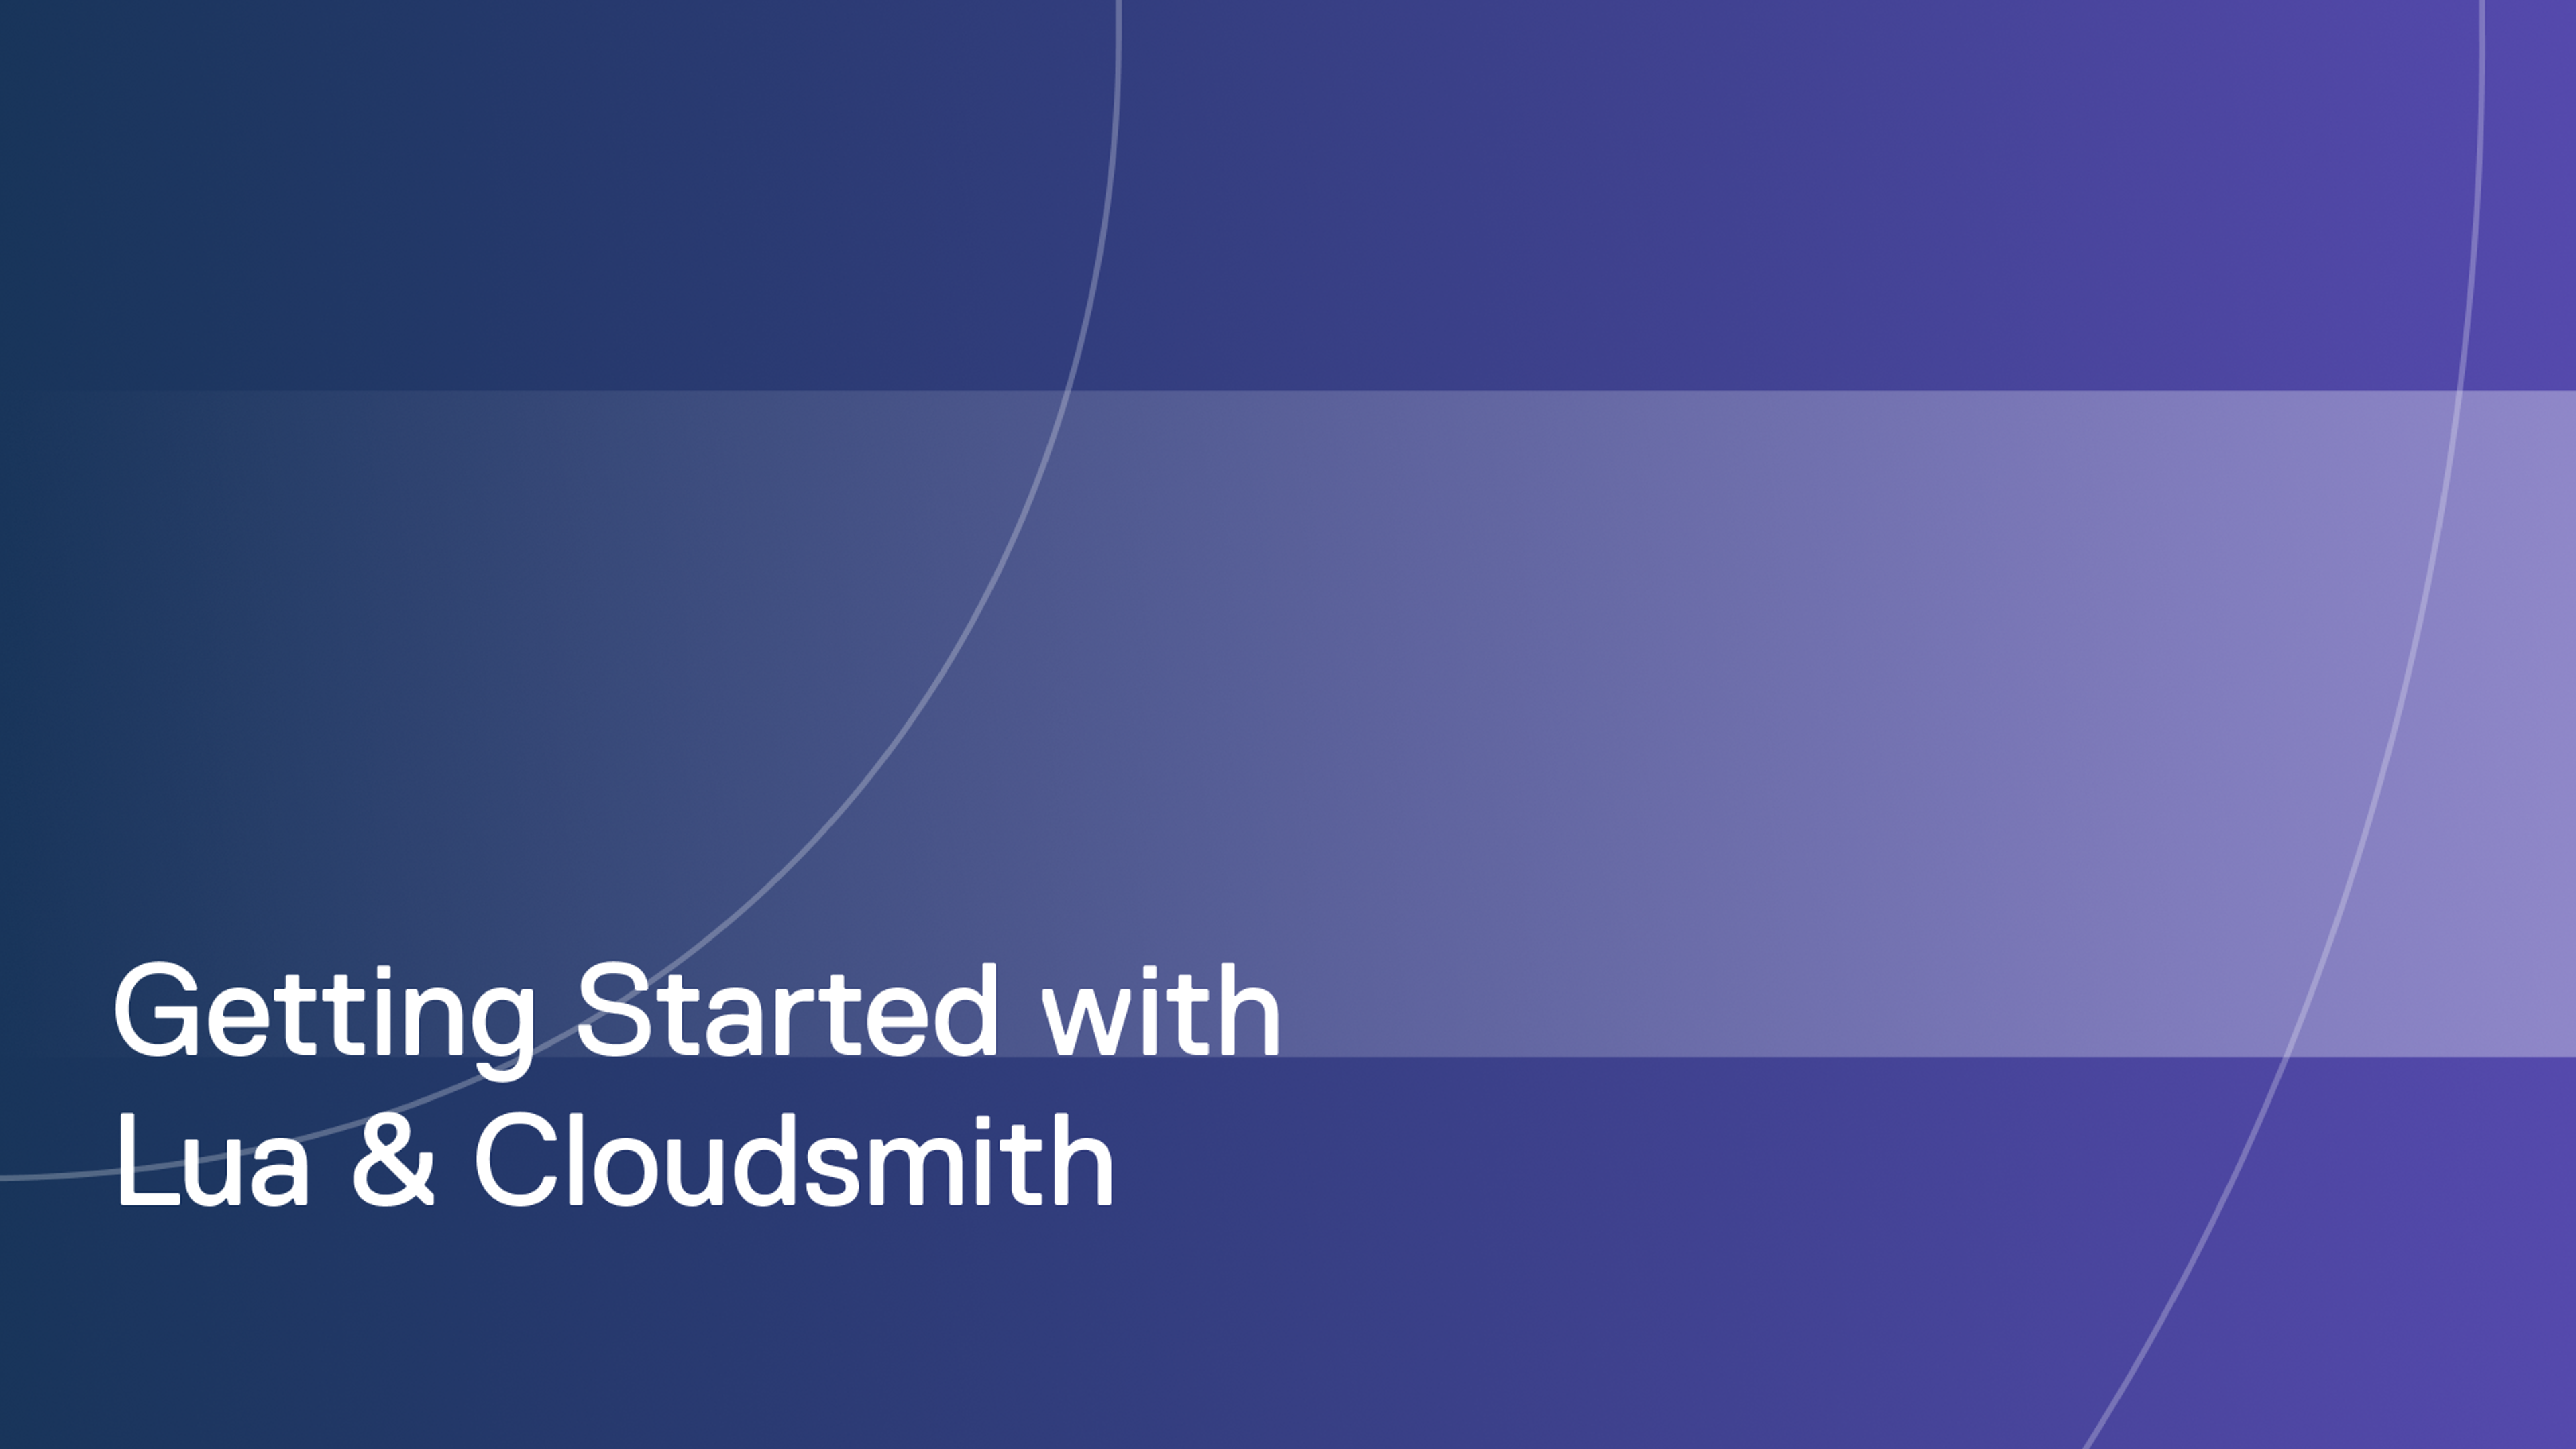 Getting started with Lua and Cloudsmith